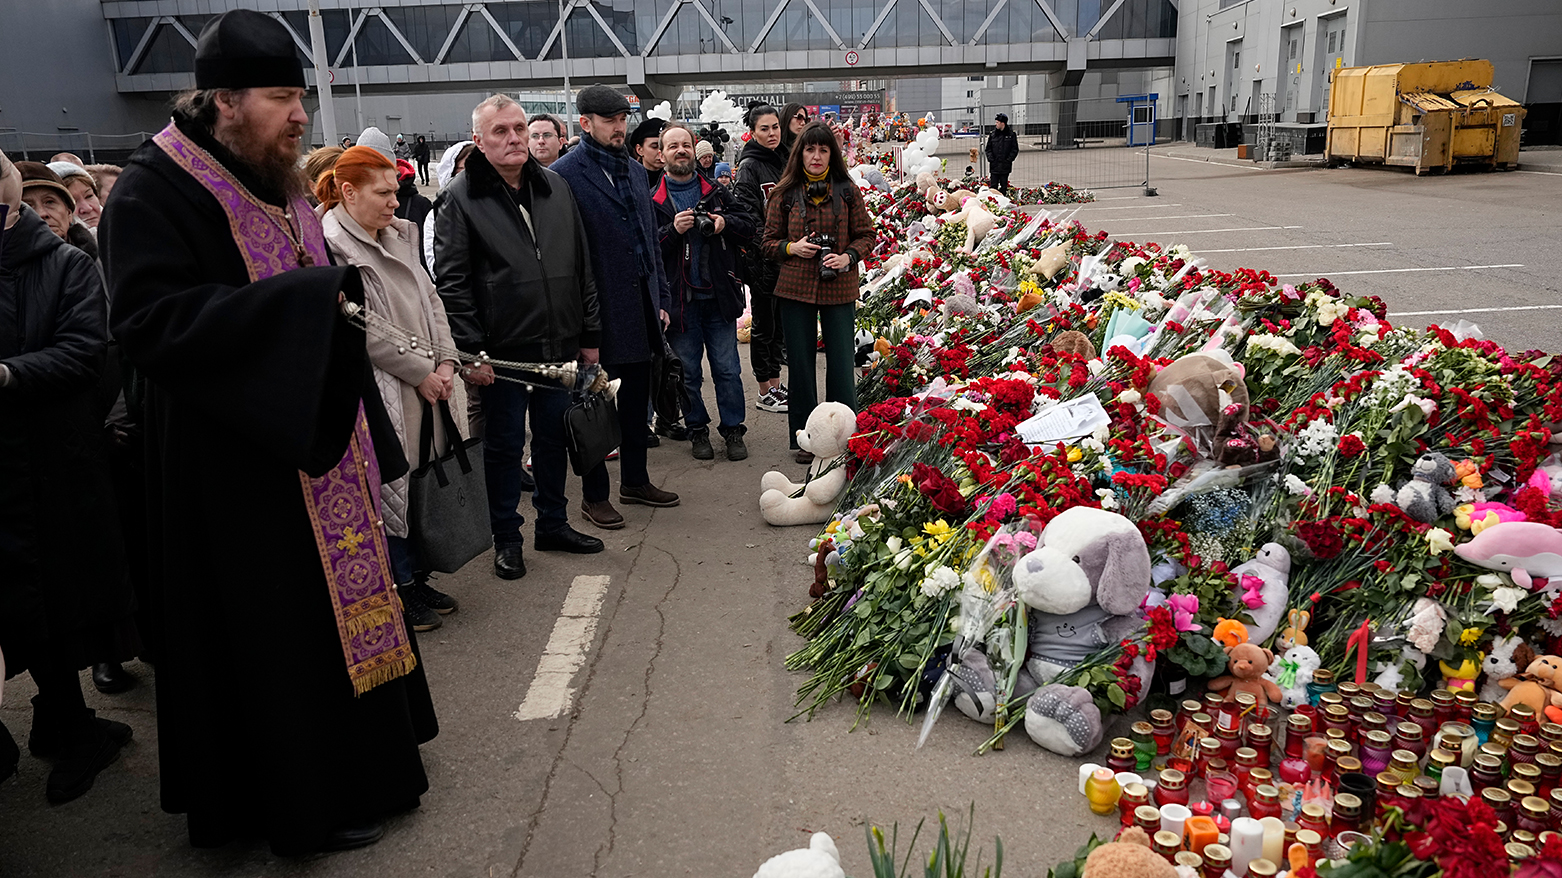 Russia persists in blaming Ukraine for concert attack despite its denial and Islamic States claim